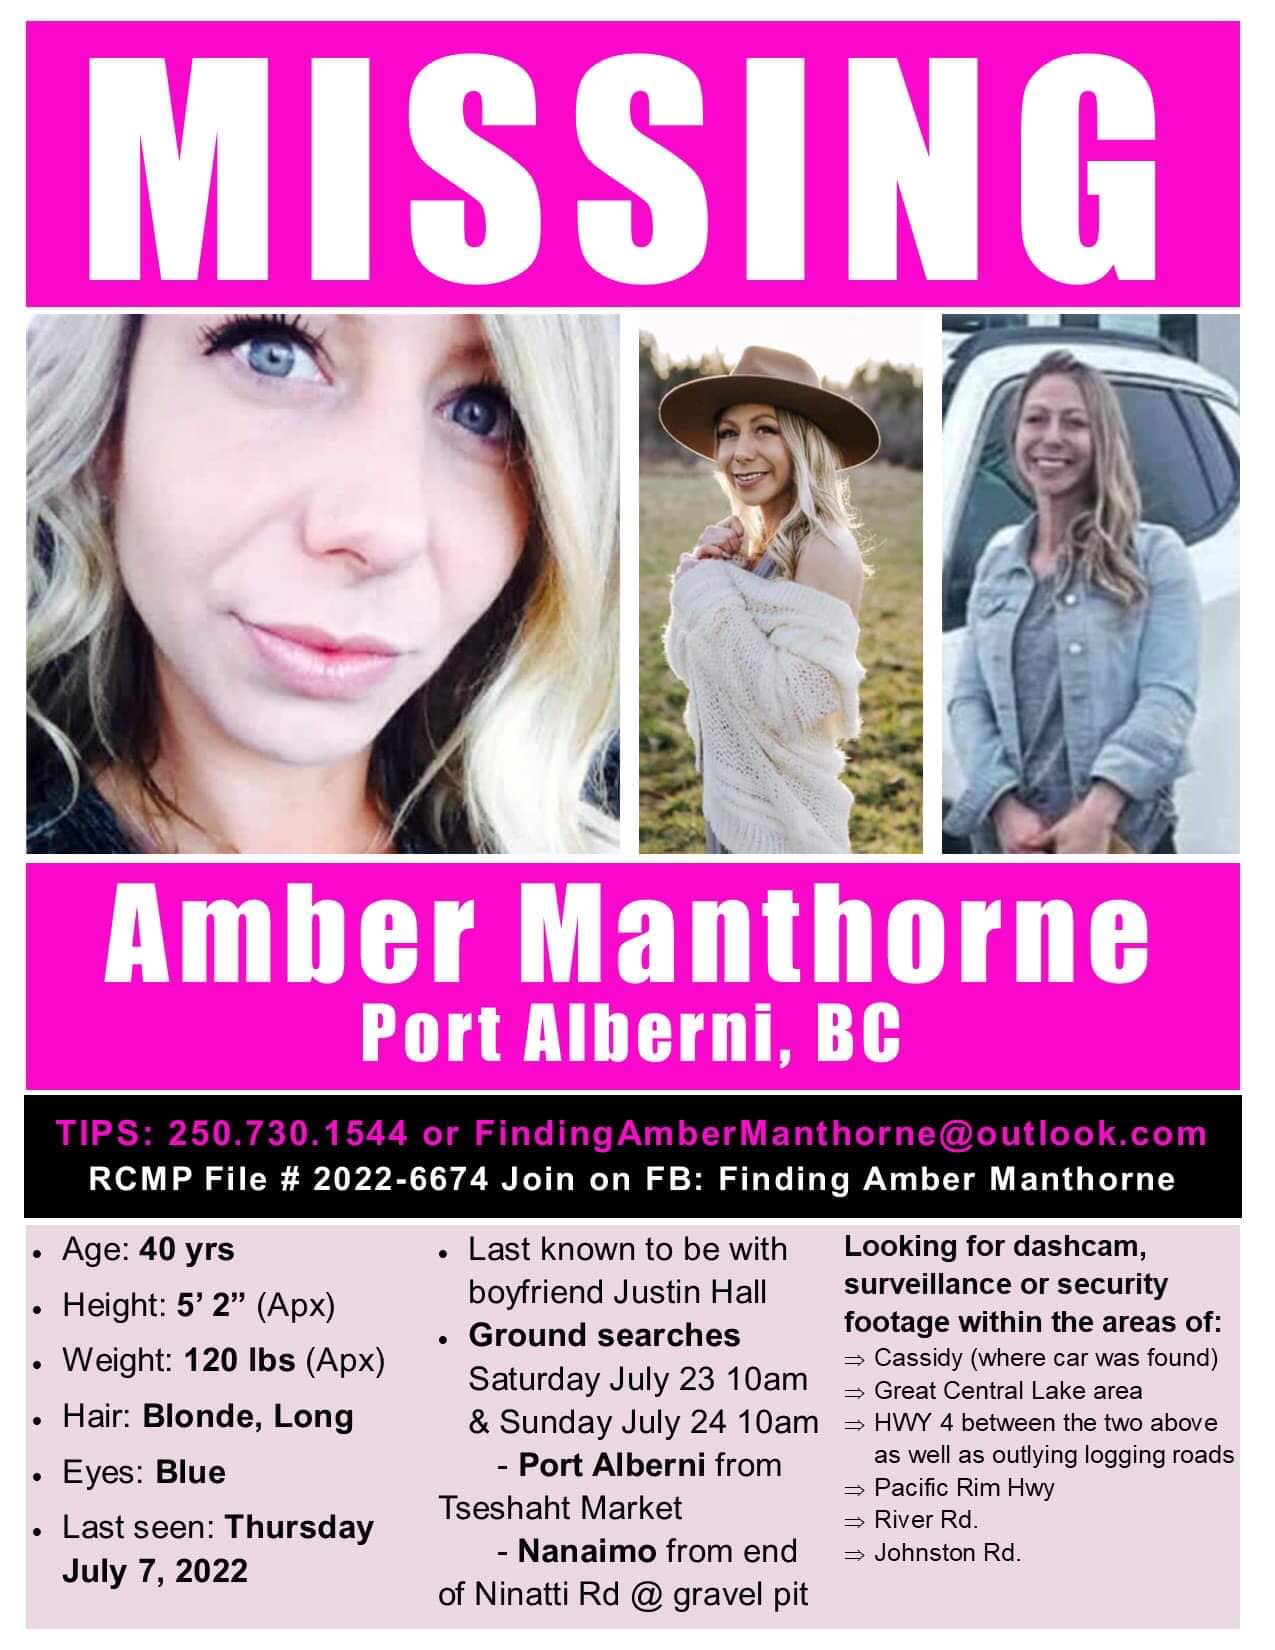 A missing person poster with the word MISSING in large at the top features three photos of a woman